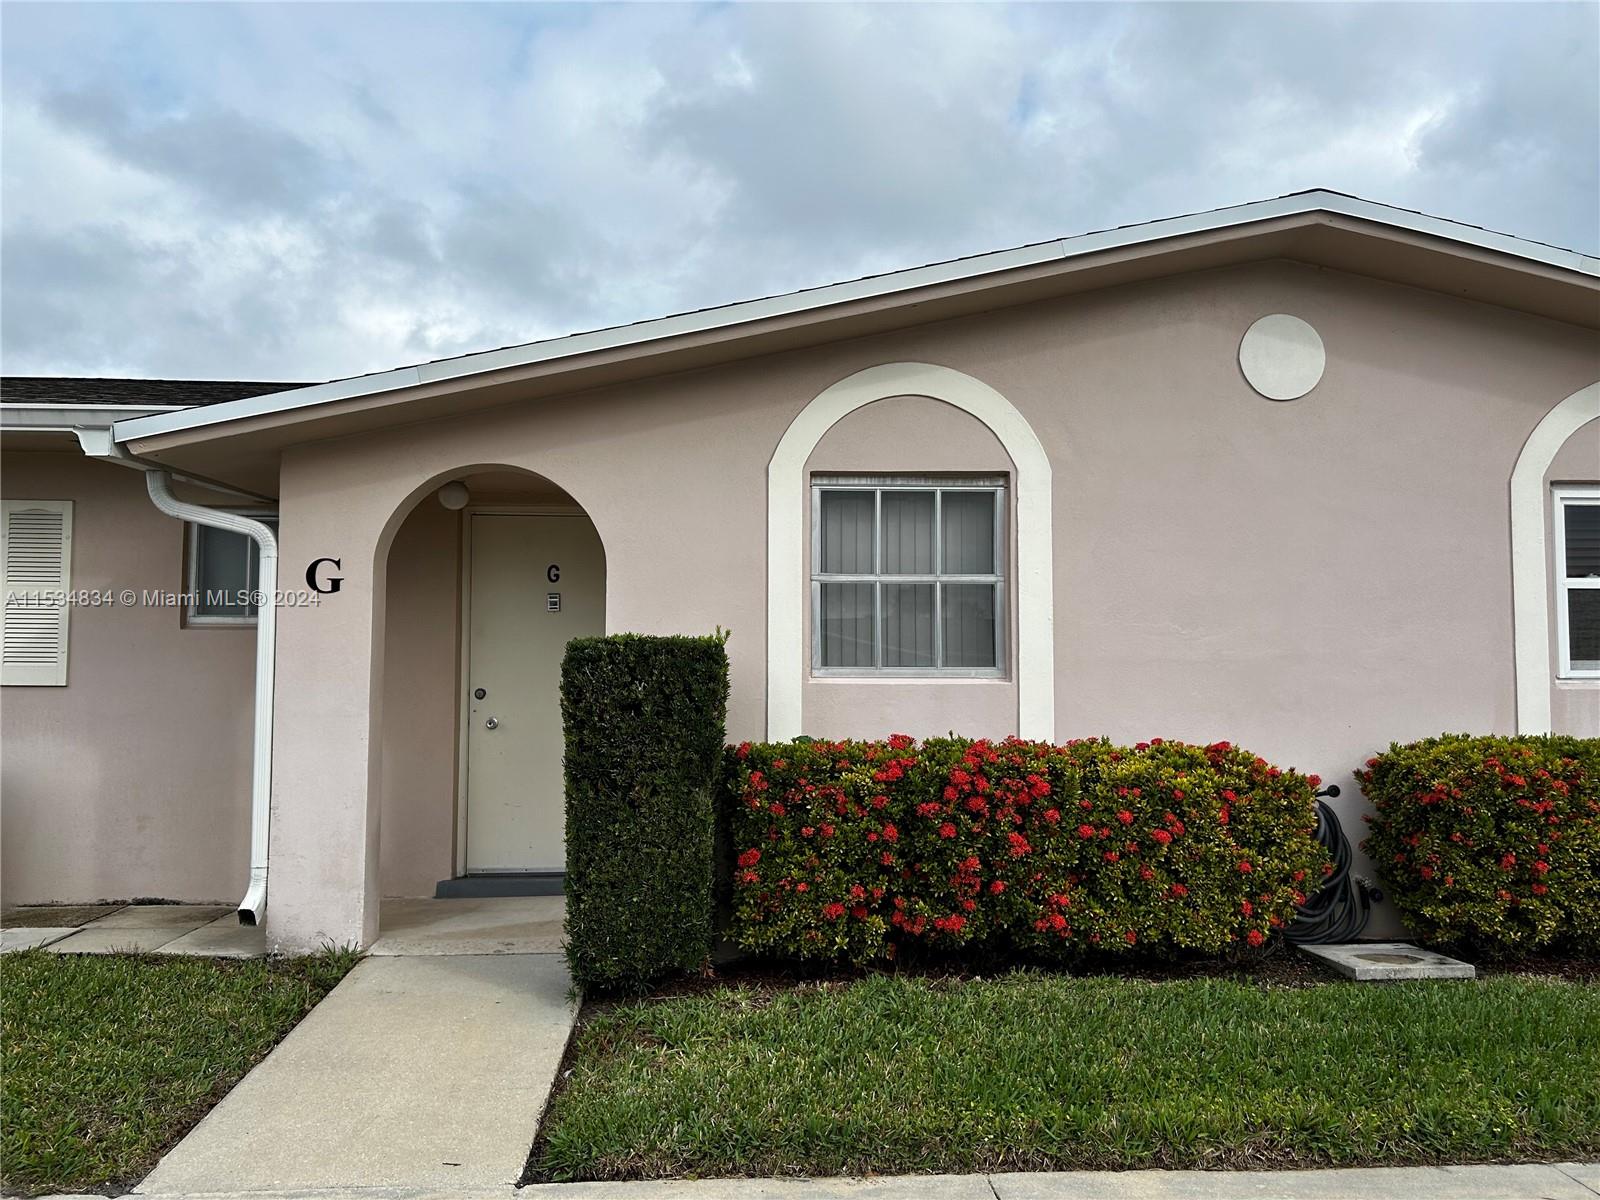 Property for Sale at 2700 Dudley Dr E Dr G, West Palm Beach, Palm Beach County, Florida - Bedrooms: 2 
Bathrooms: 2  - $168,000